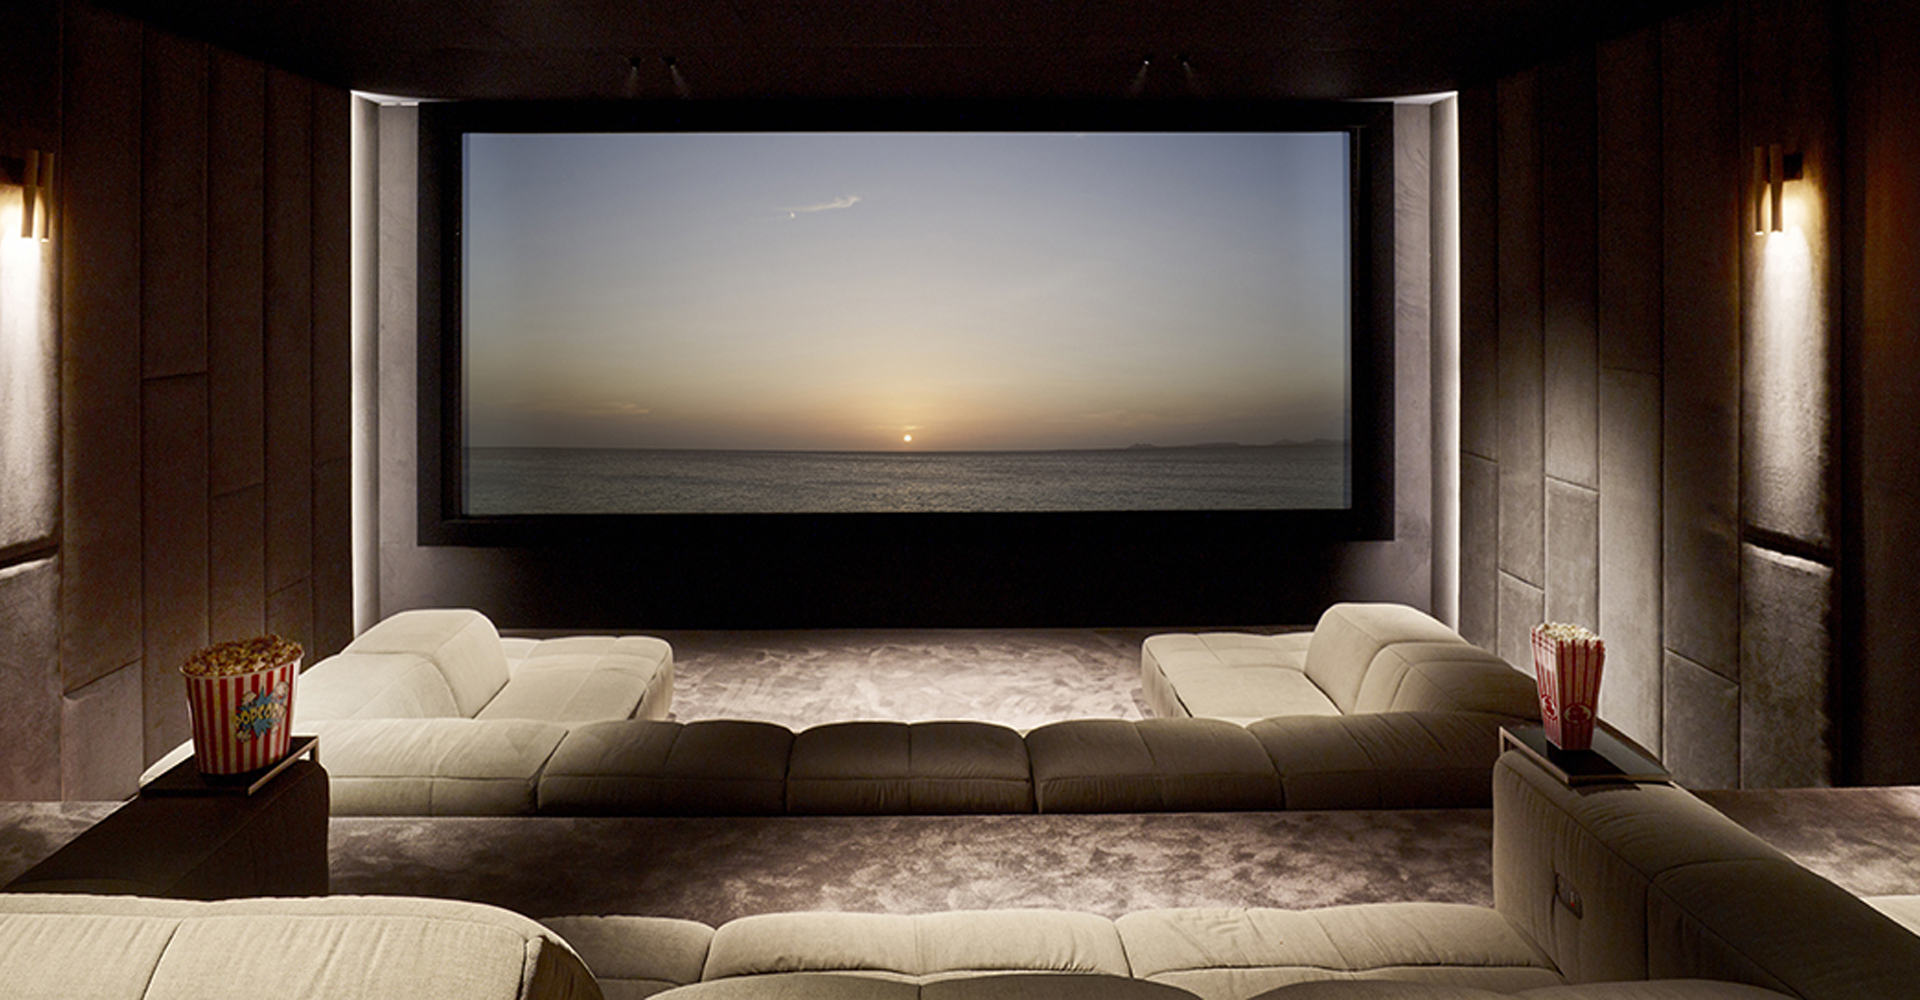 The best private home cinema in Europe?